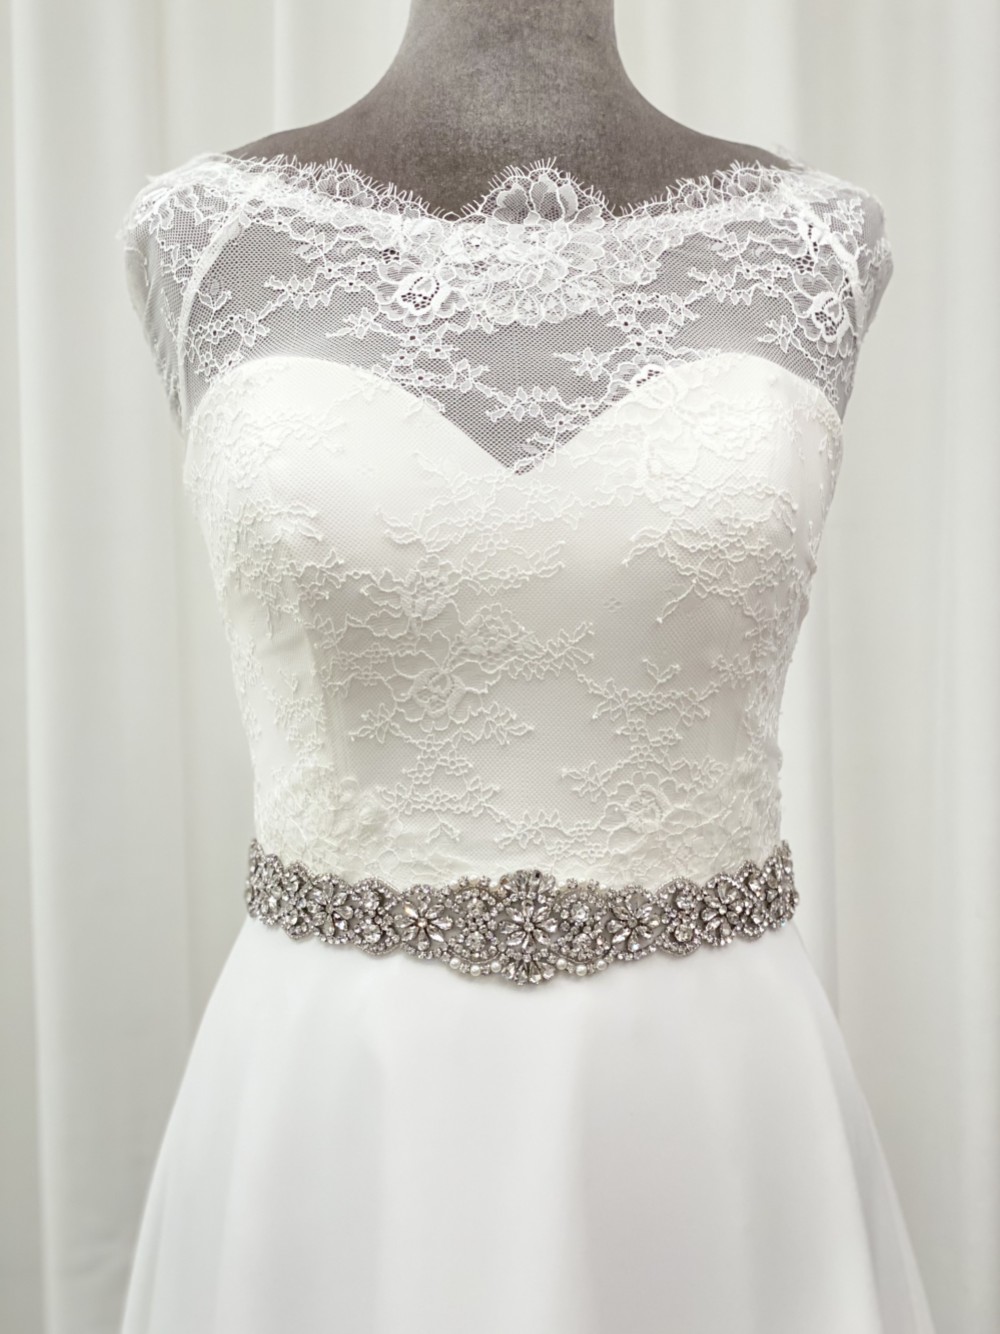 Photograph: Perfect Bridal Emmy Vintage Inspired Crystal and Beaded Dress Belt